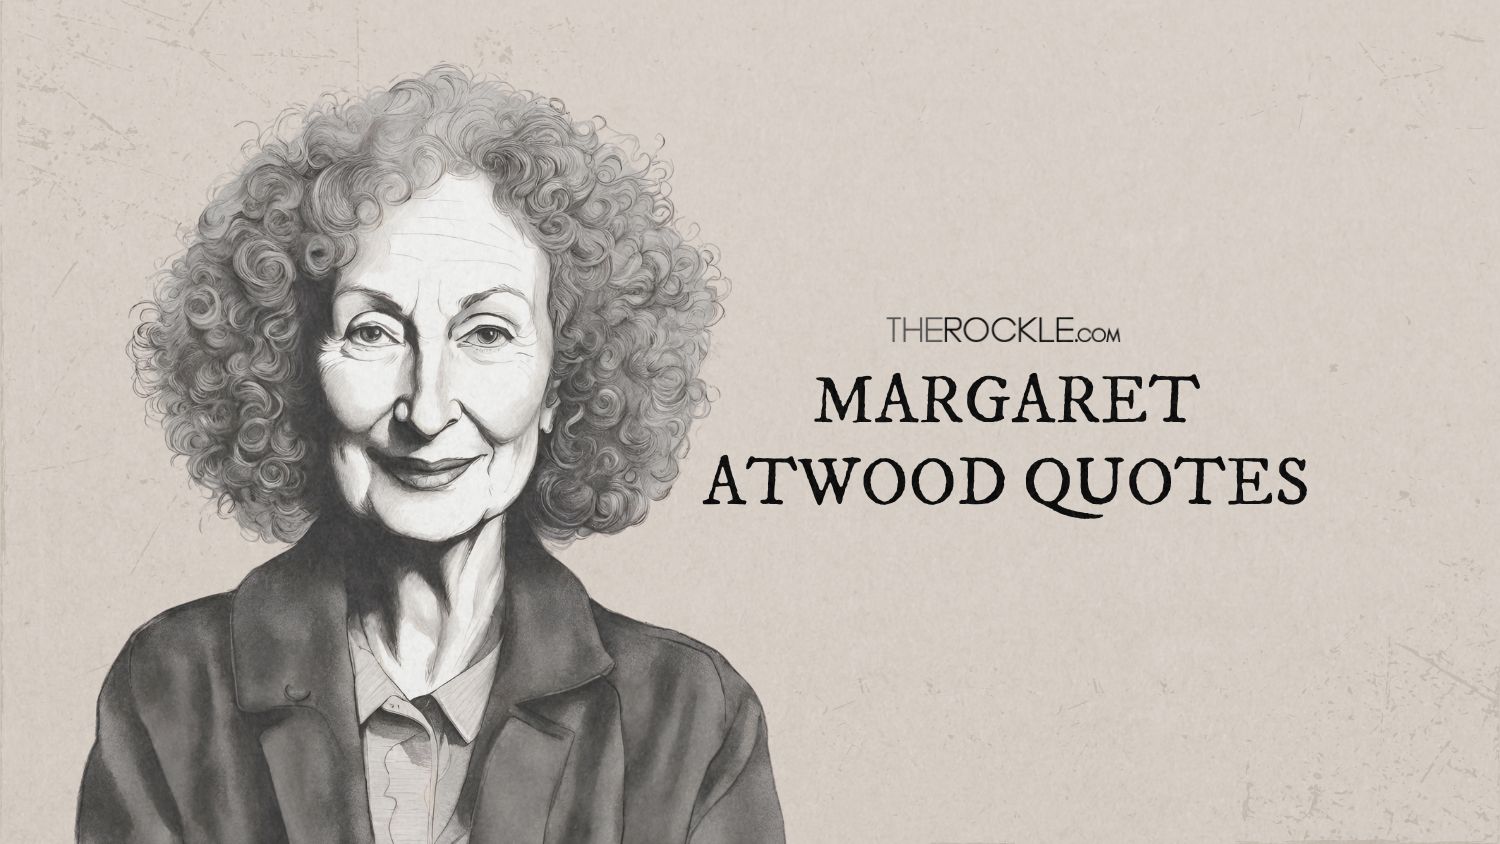 20 Margaret Atwood Quotes for the Thoughtful Reader